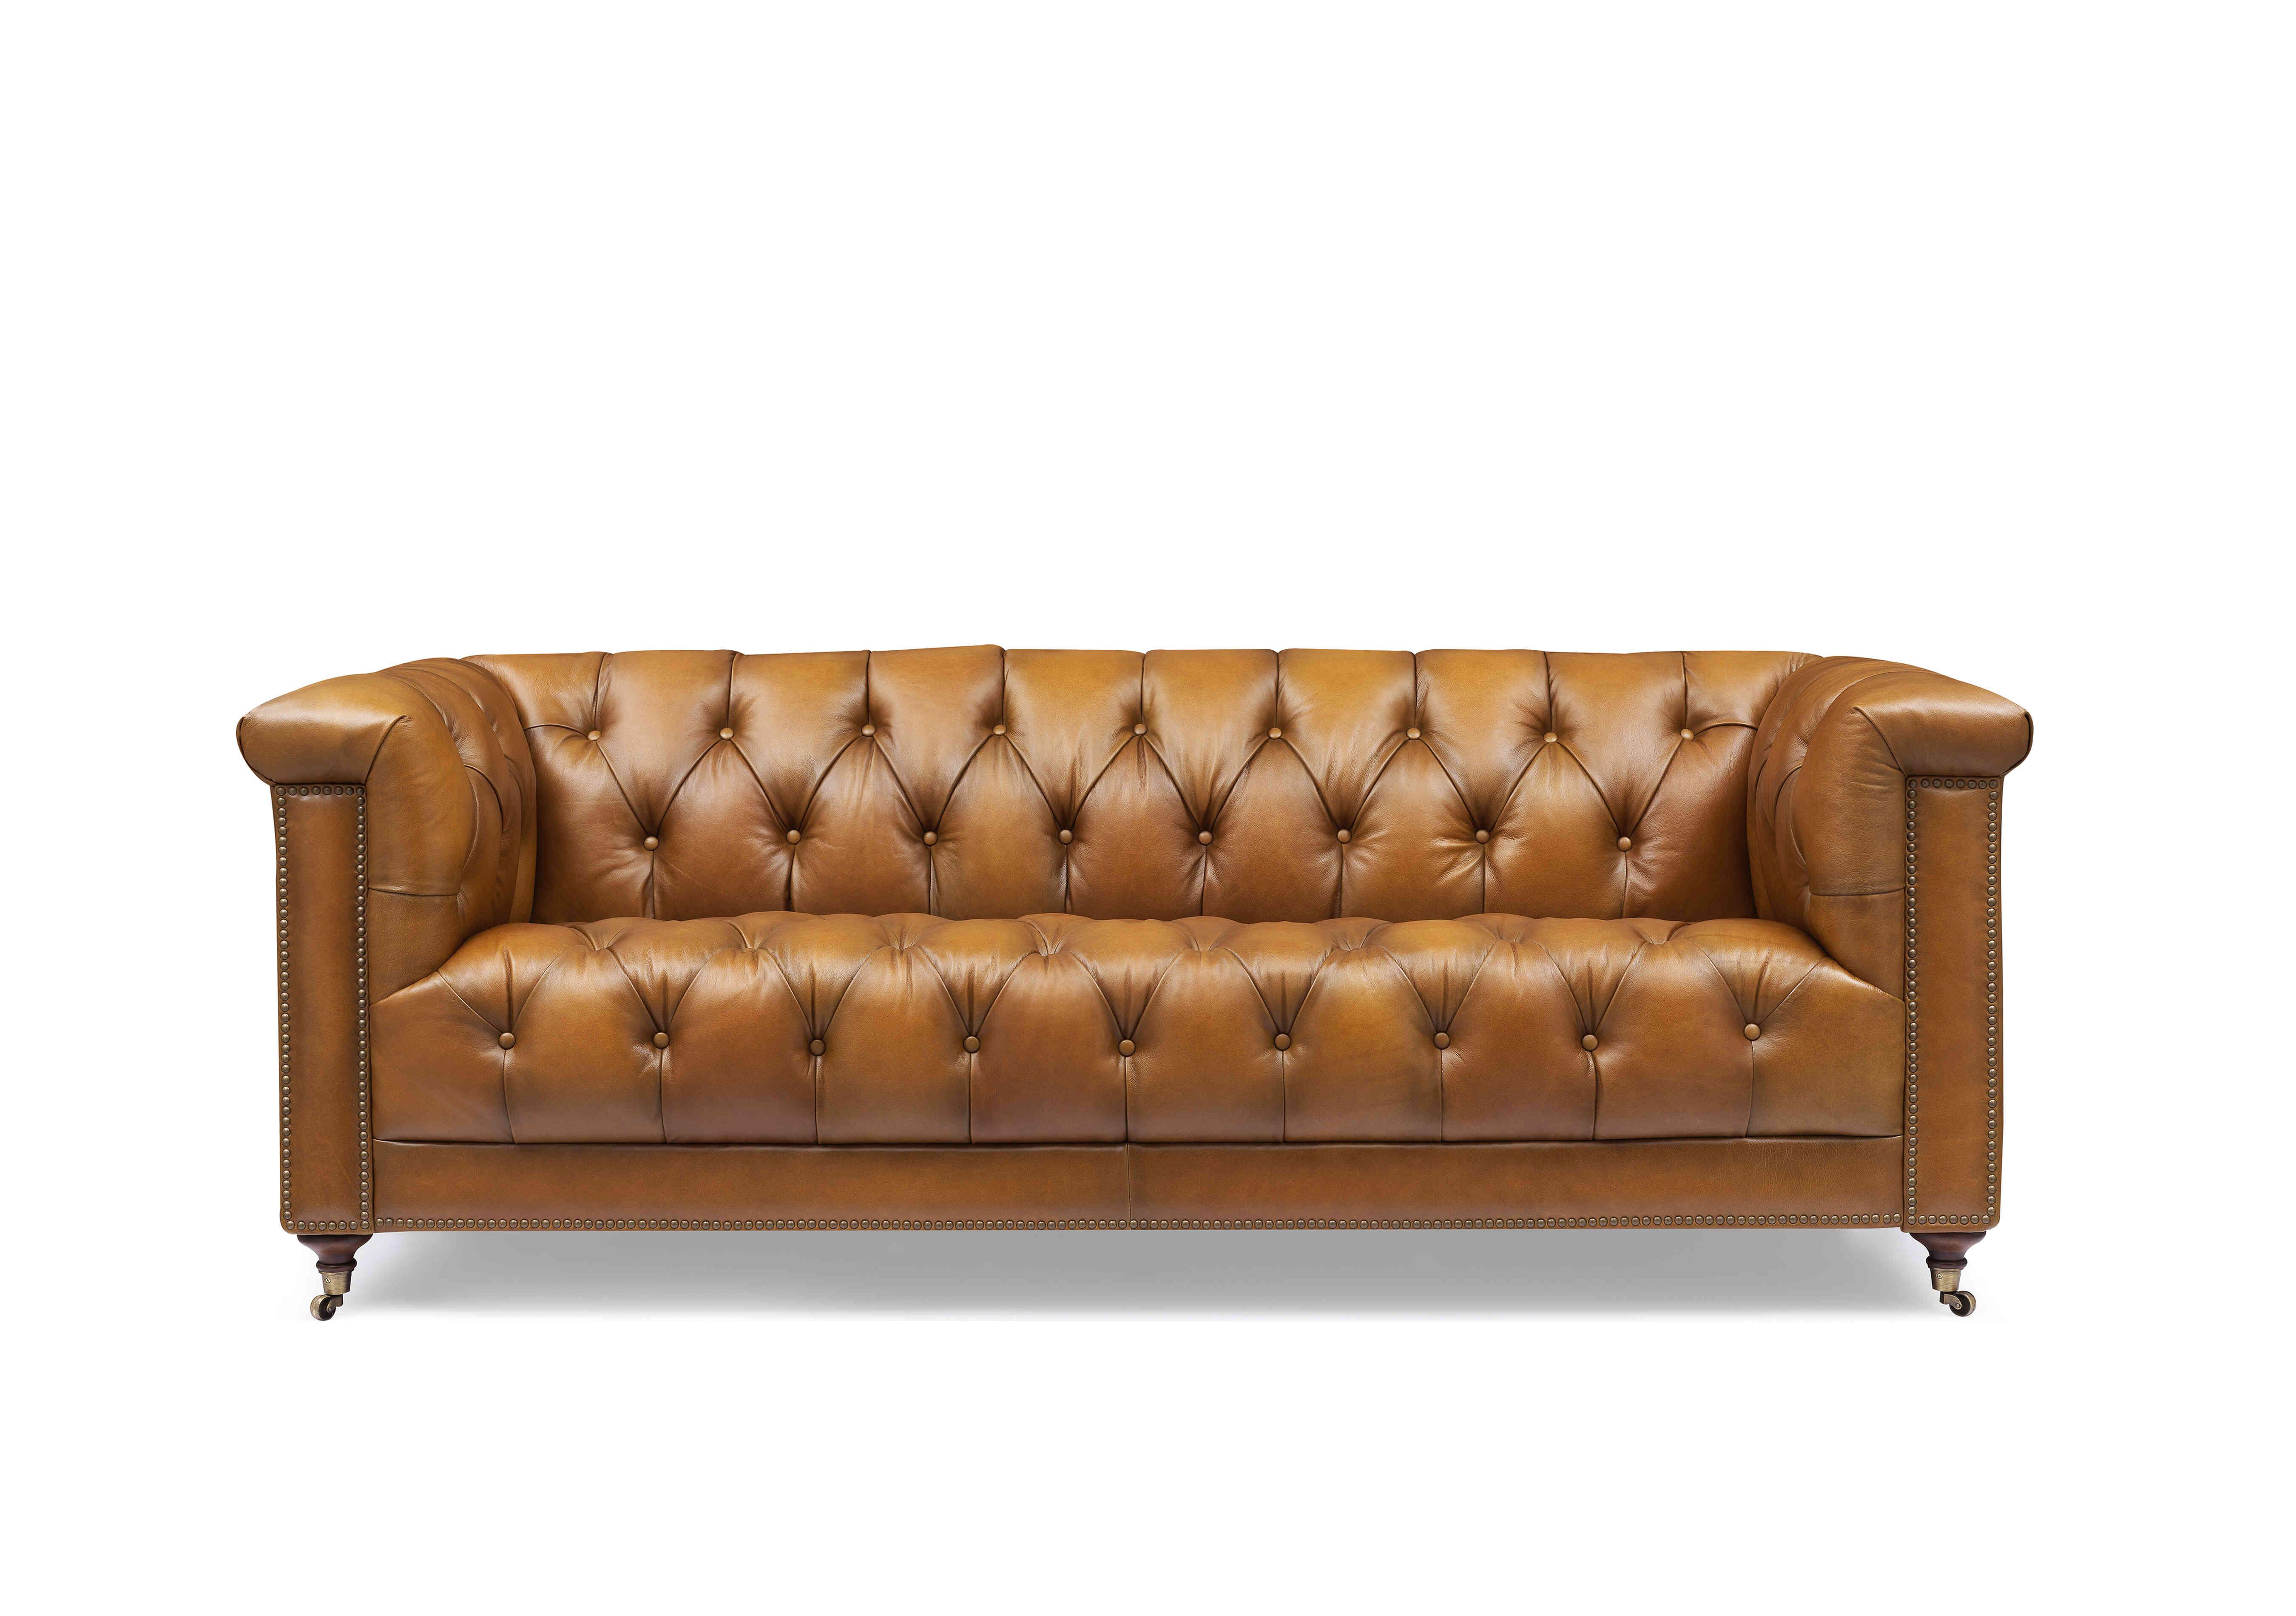 Wallace 3 Seater Leather Chesterfield Sofa in X3y1-1957ls Inca on Furniture Village